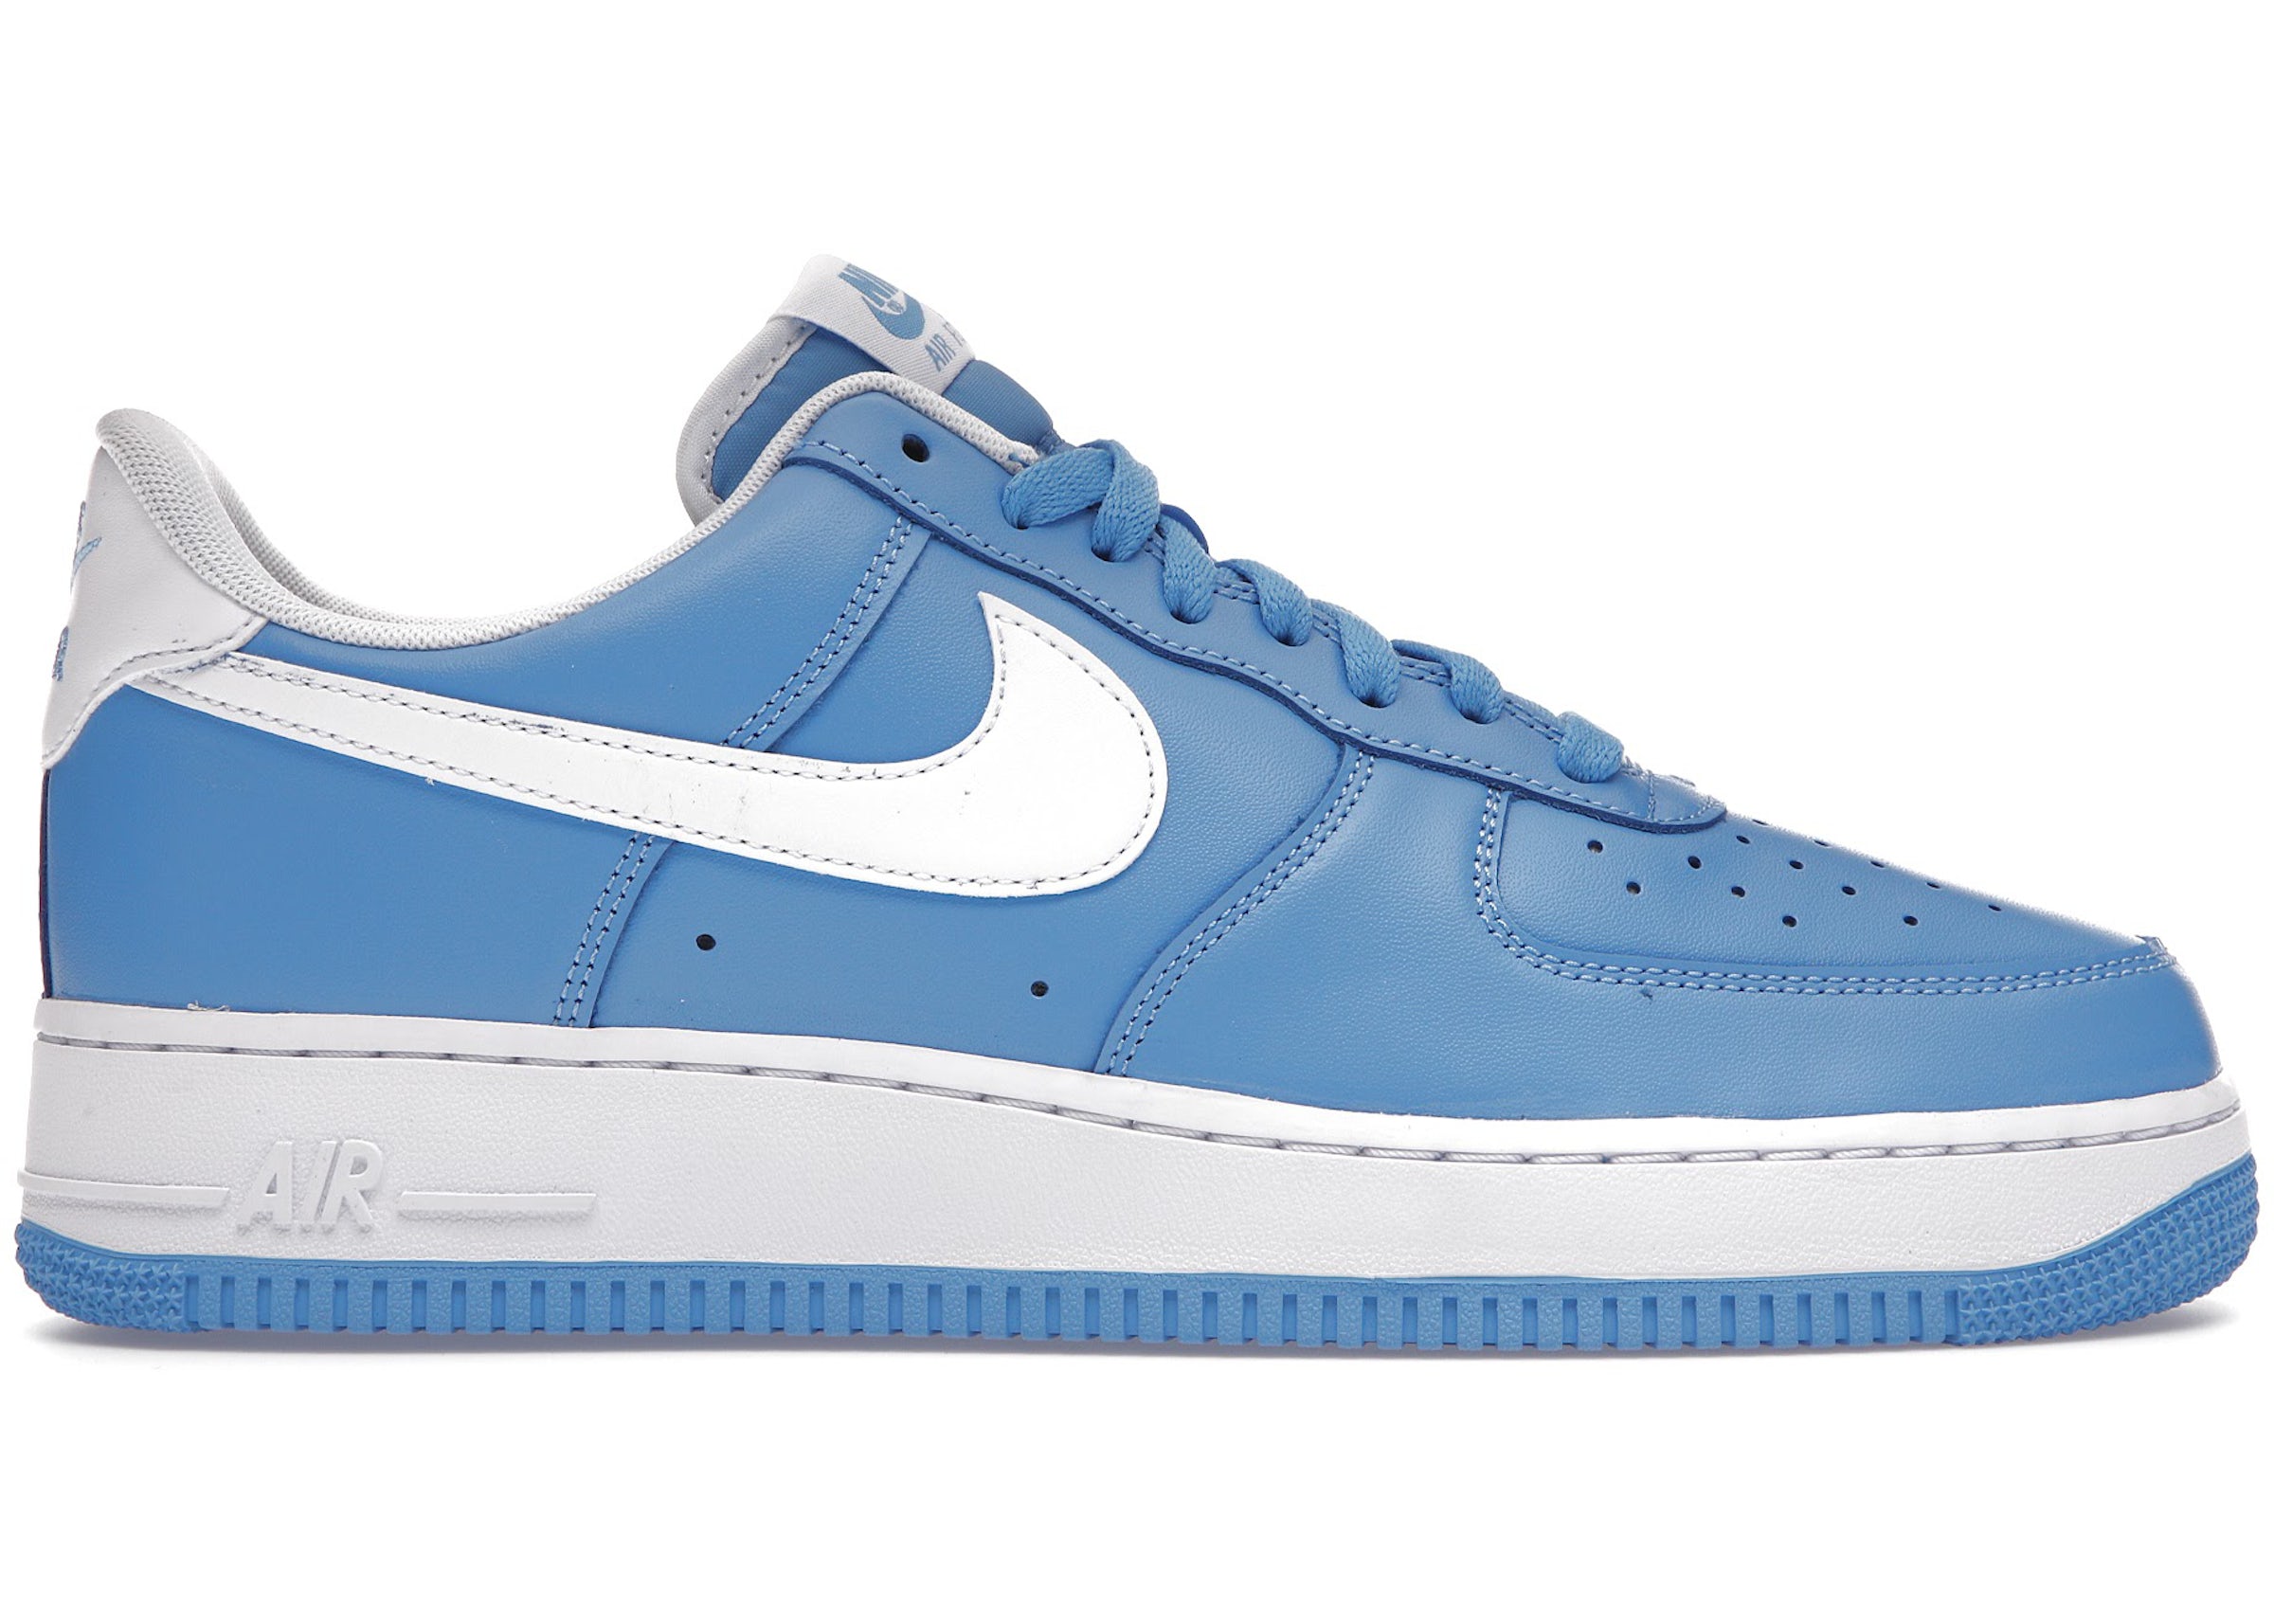 Nike Air Force 1 Low Off-White University Blue painting (40x30cm